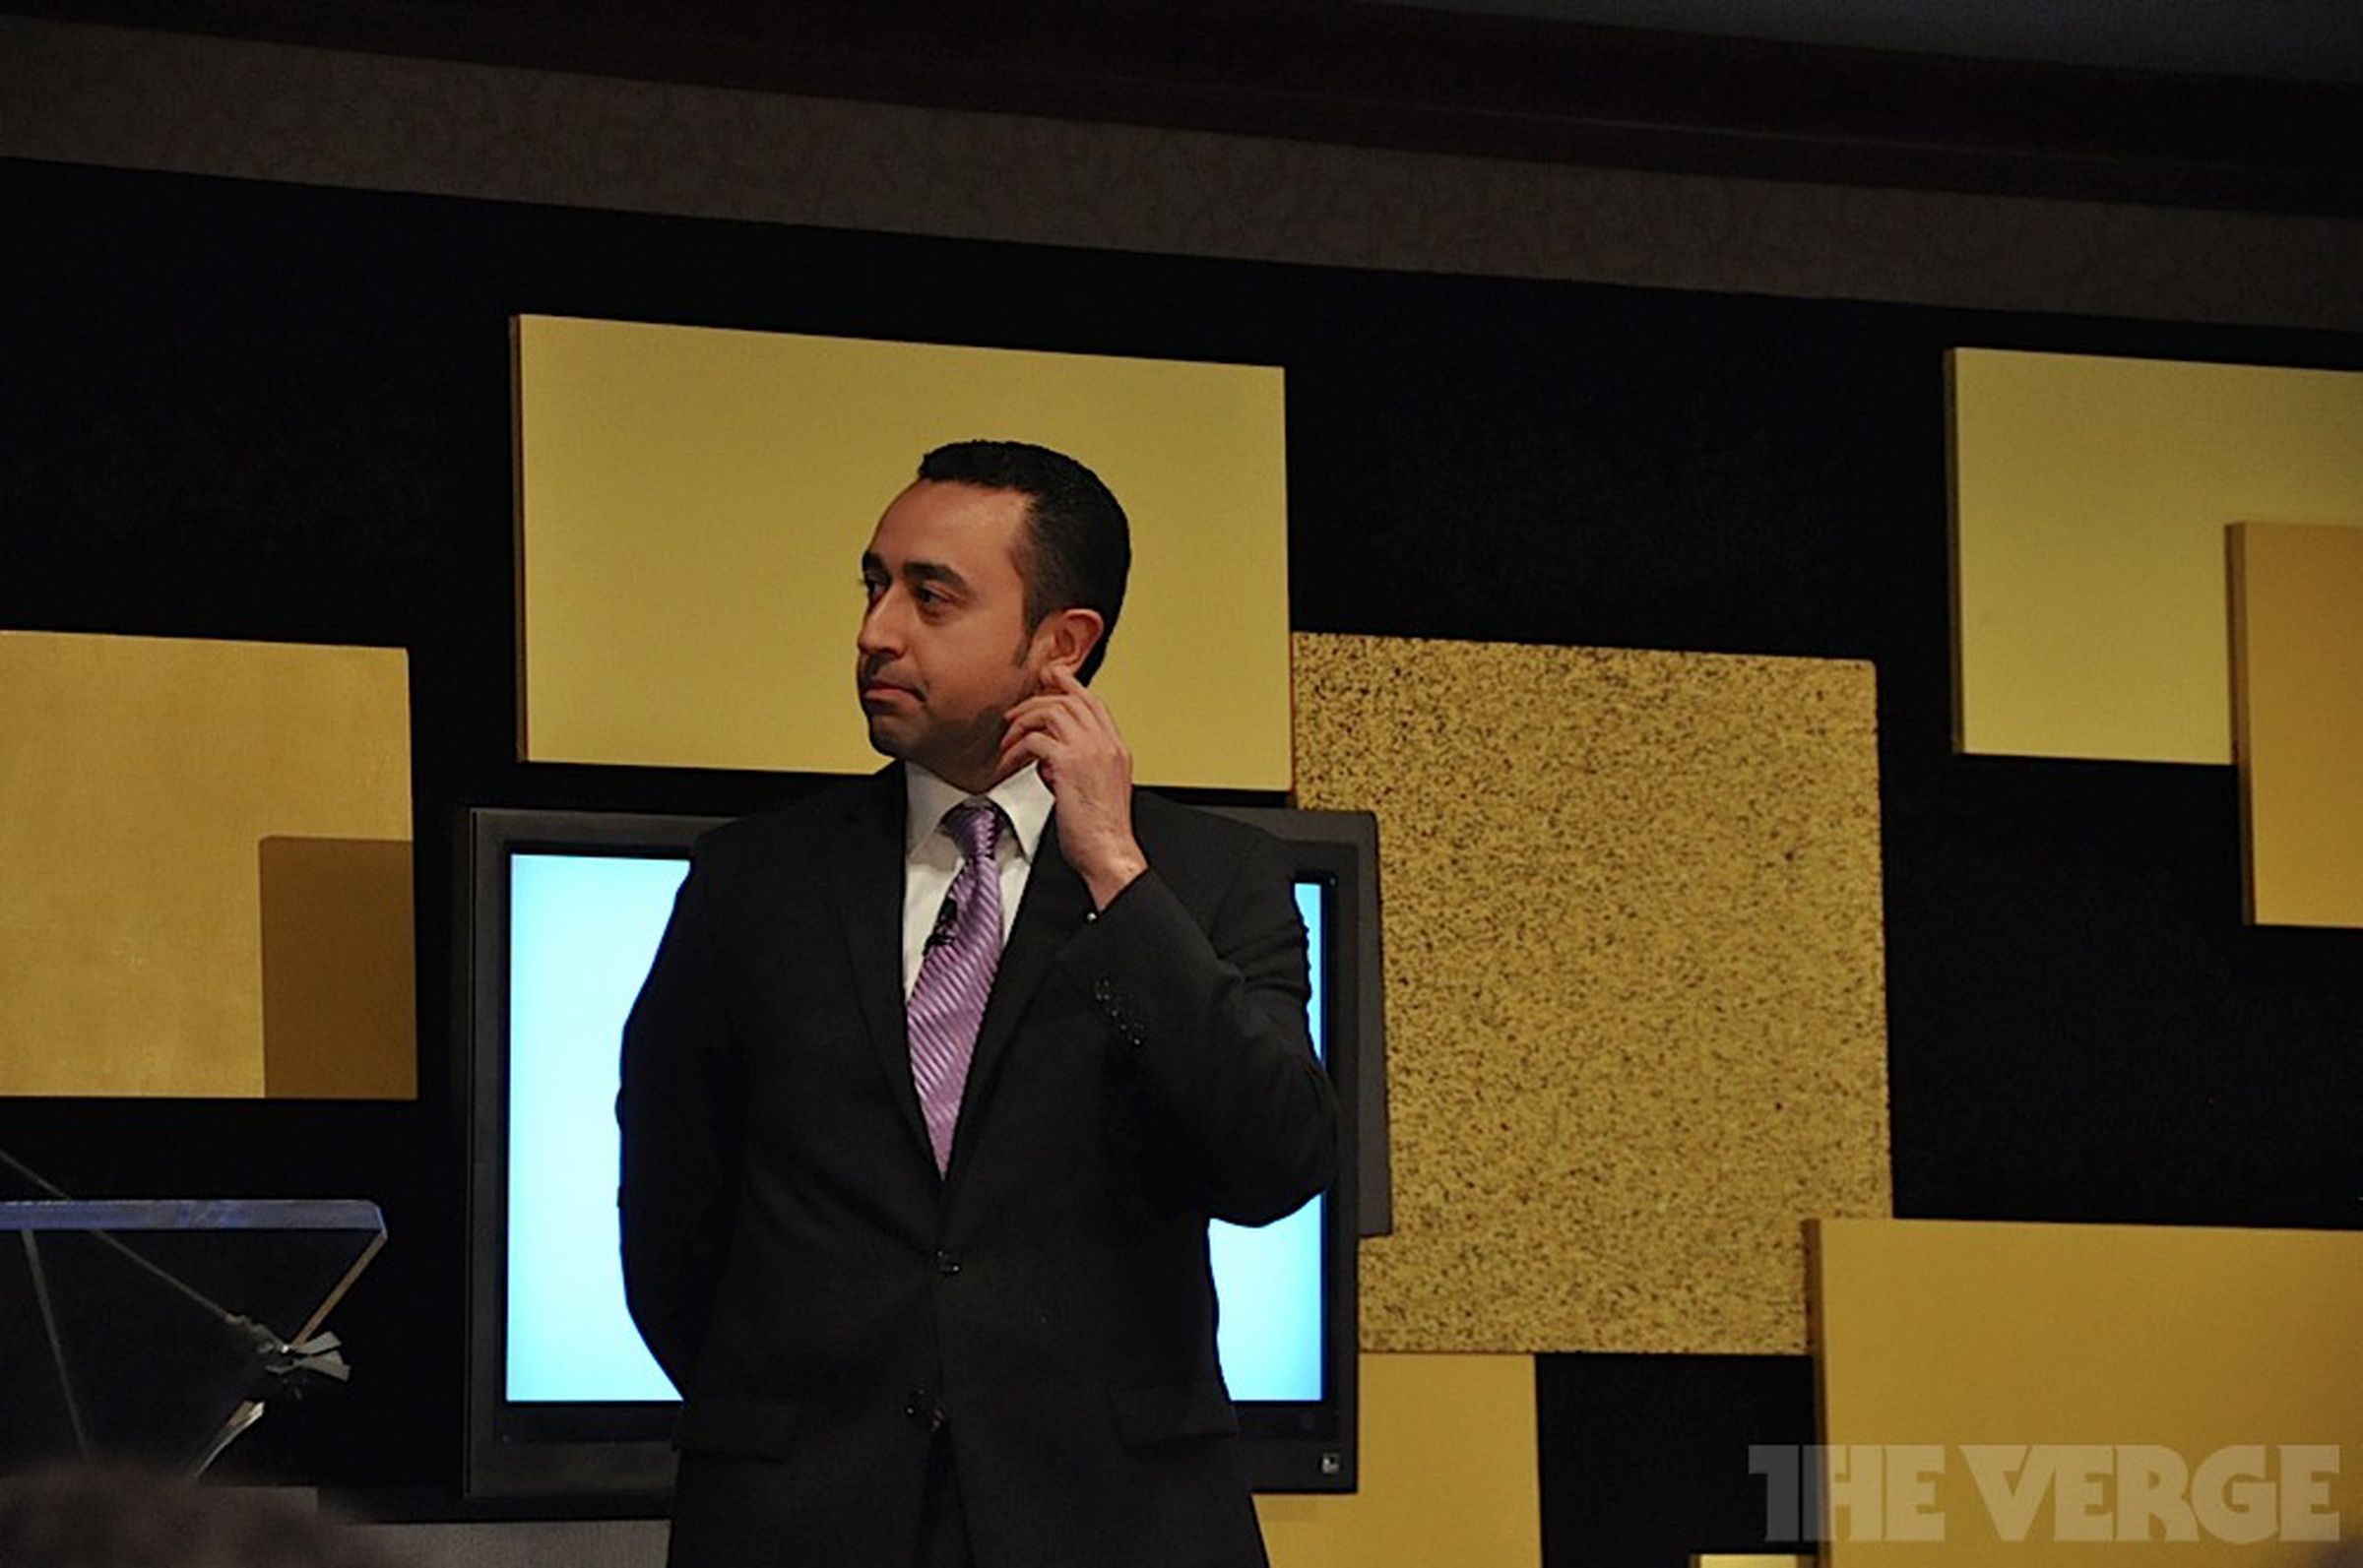 Sprint's 2011 Strategy Update event highlights